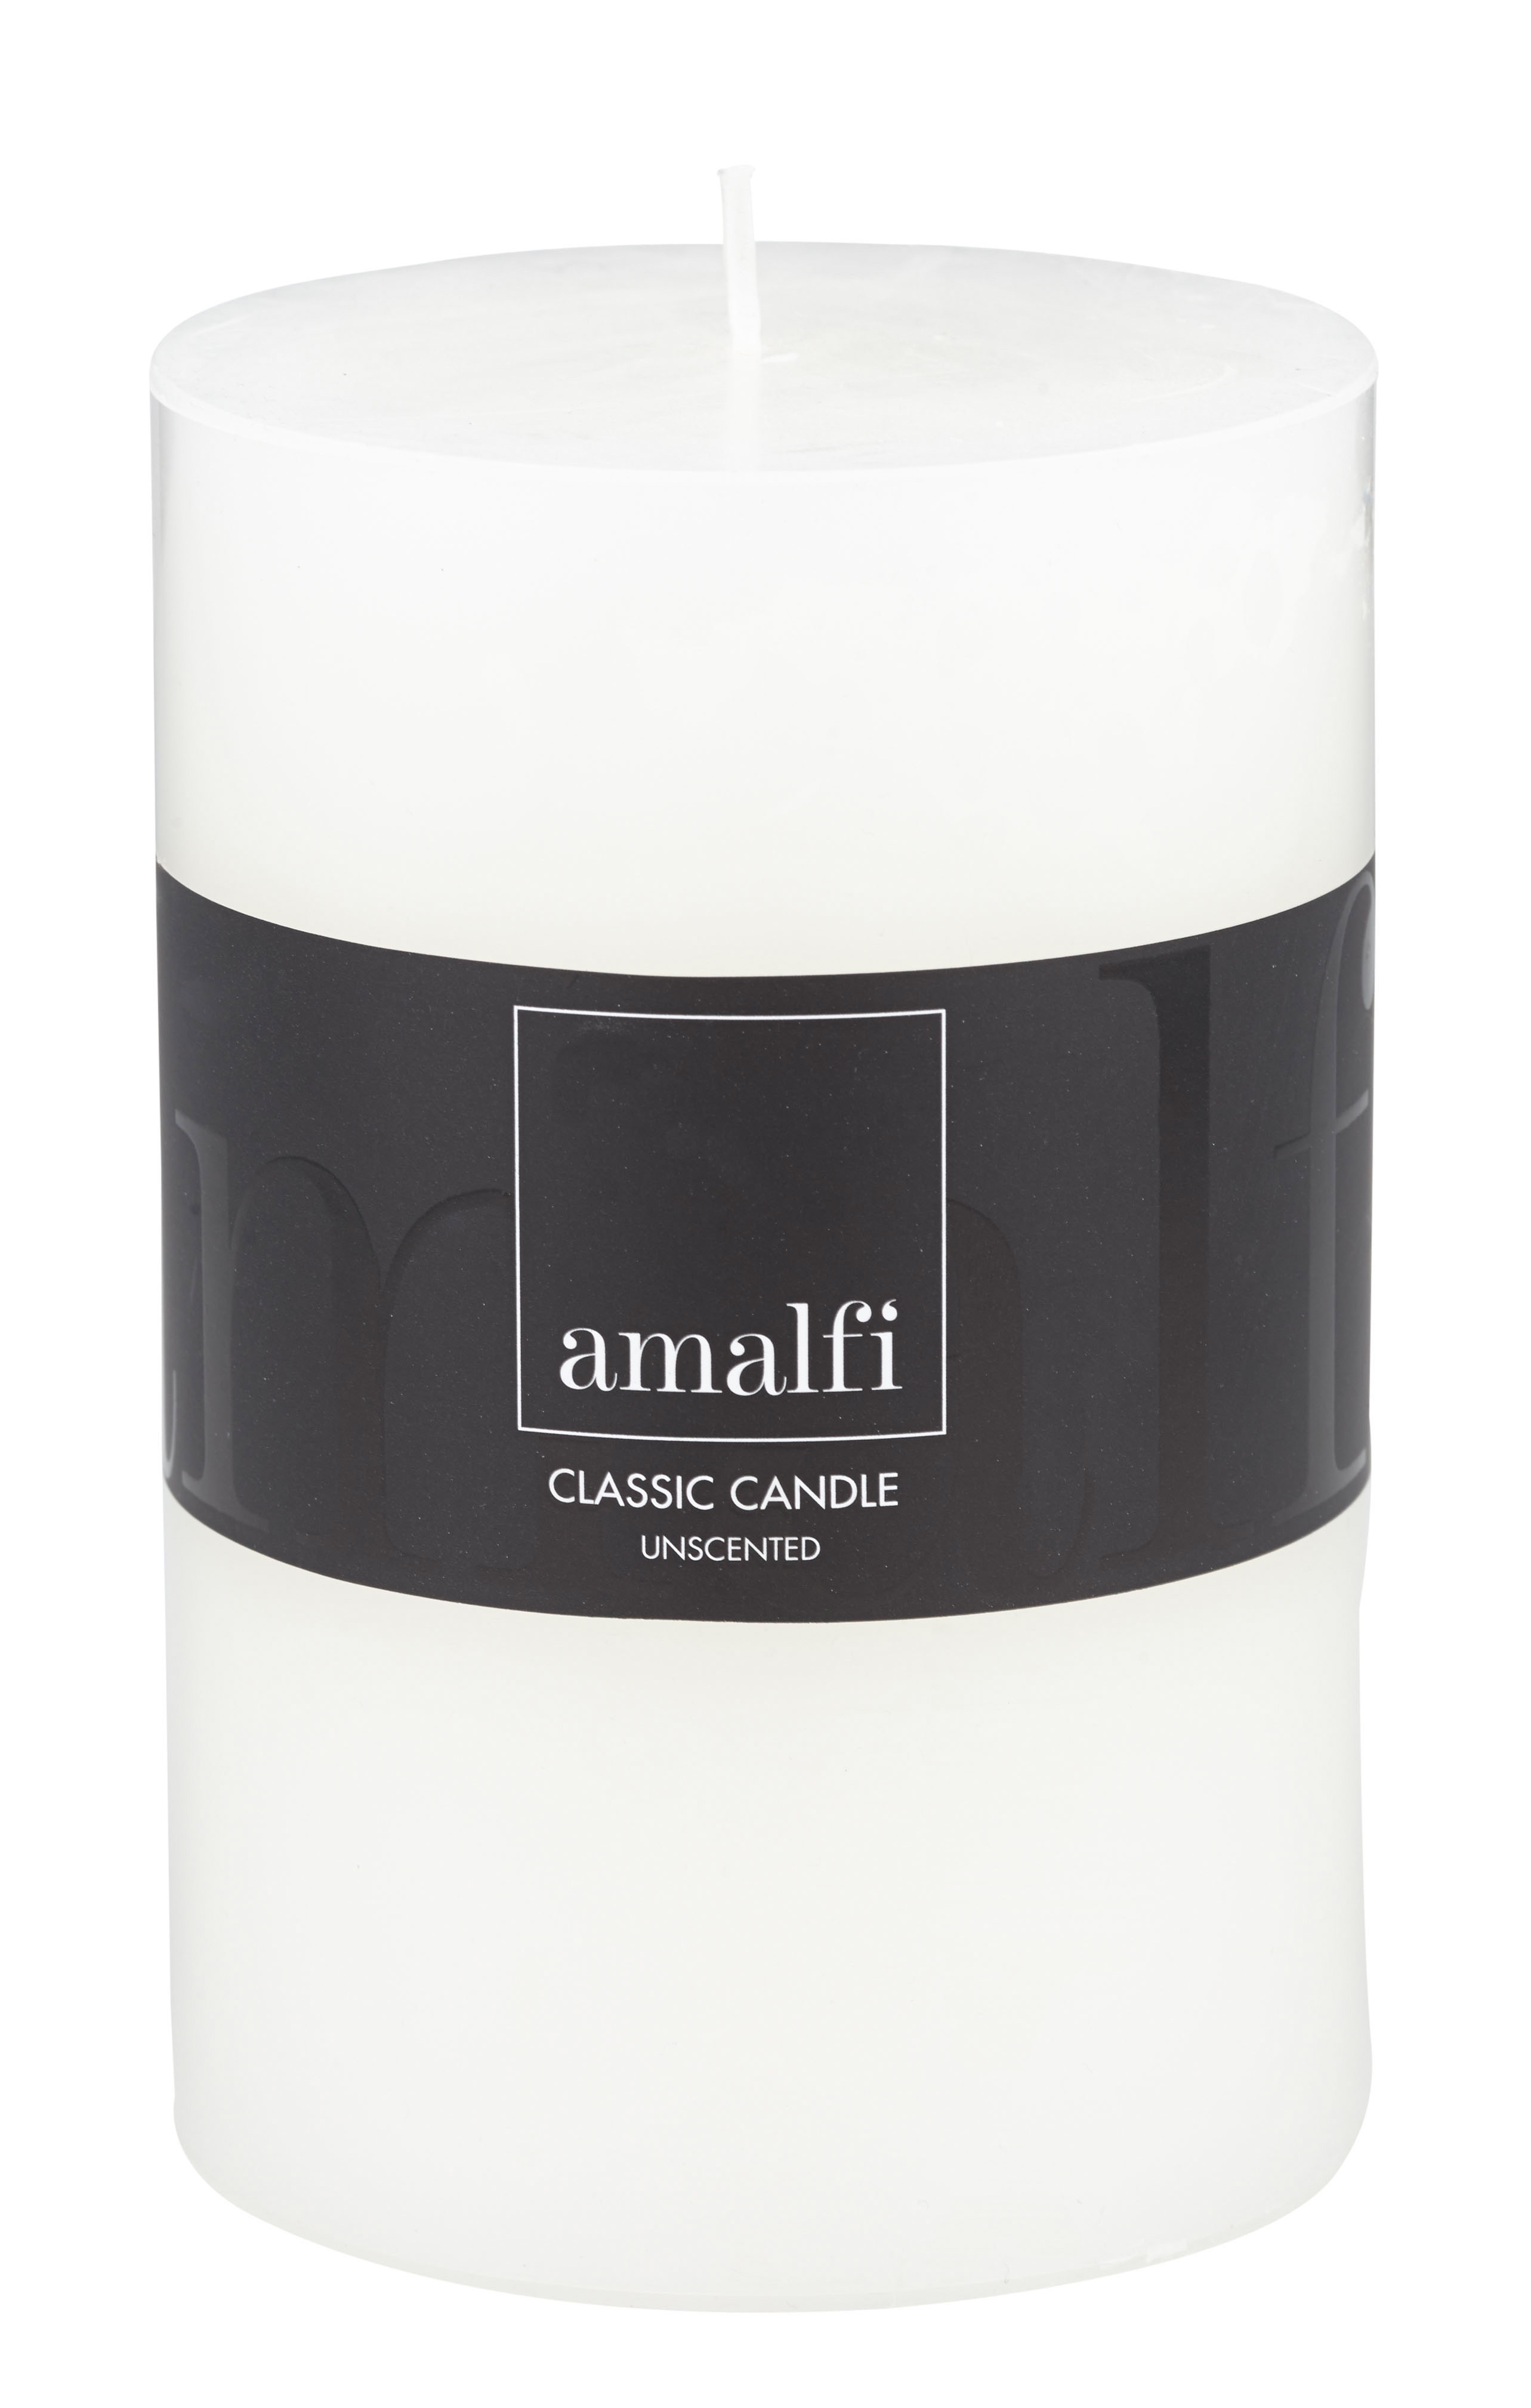 Amalfi Classic Unscented Wide Pillar Candle White 10x10x15cm